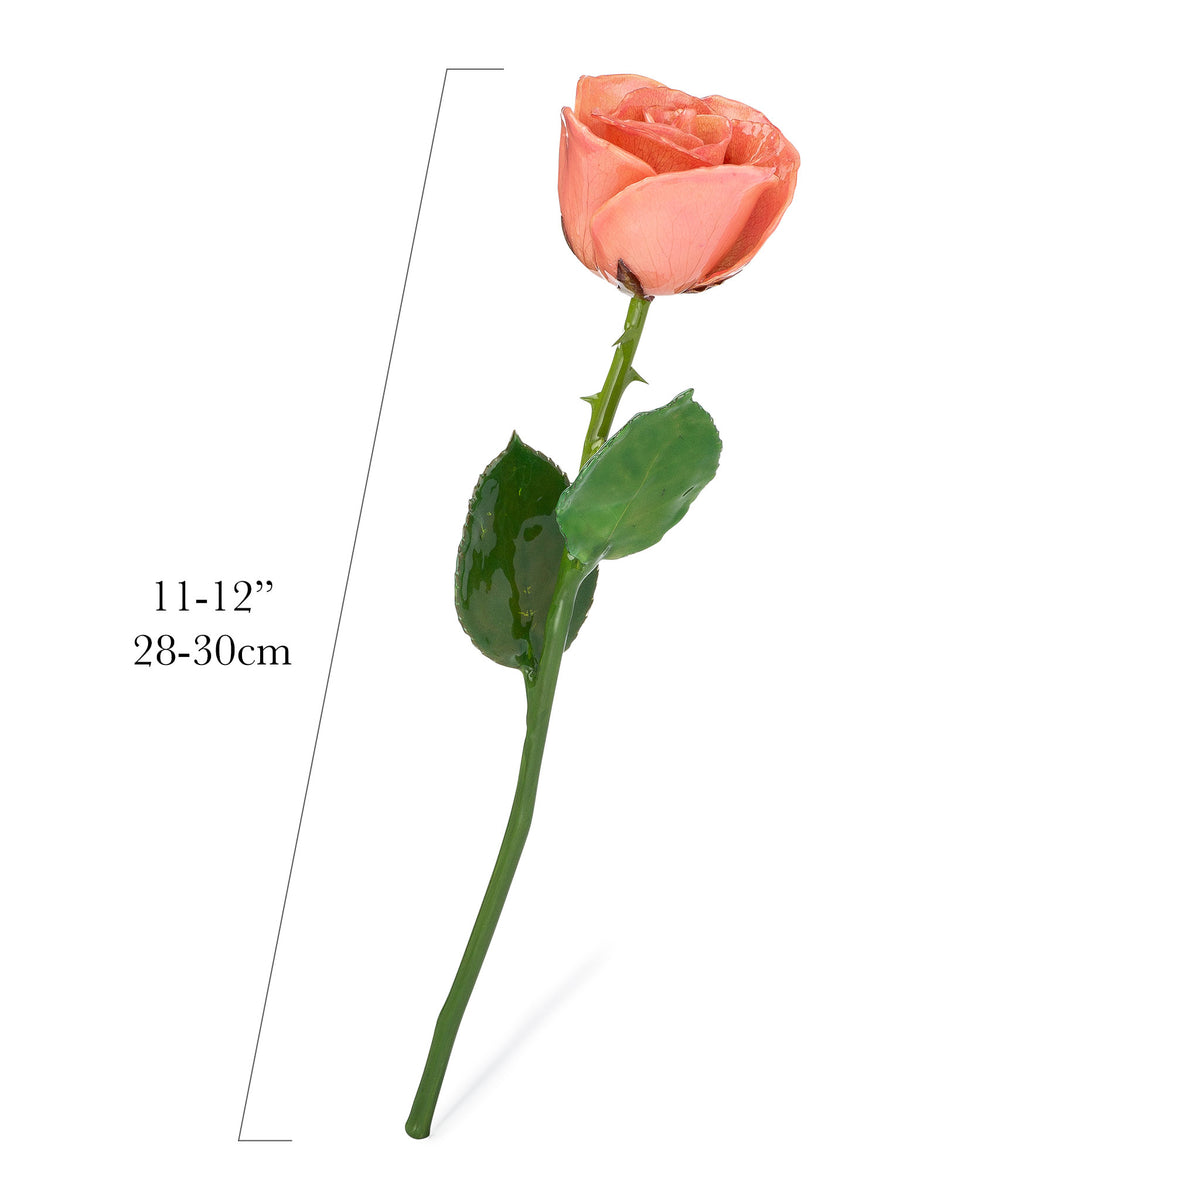 Natural (Green Stem) Forever Rose with Pink Colored Petals. View of Stem, Leaves, and Rose Petals. This a Forever Rose without any gold or other precious metals on it.